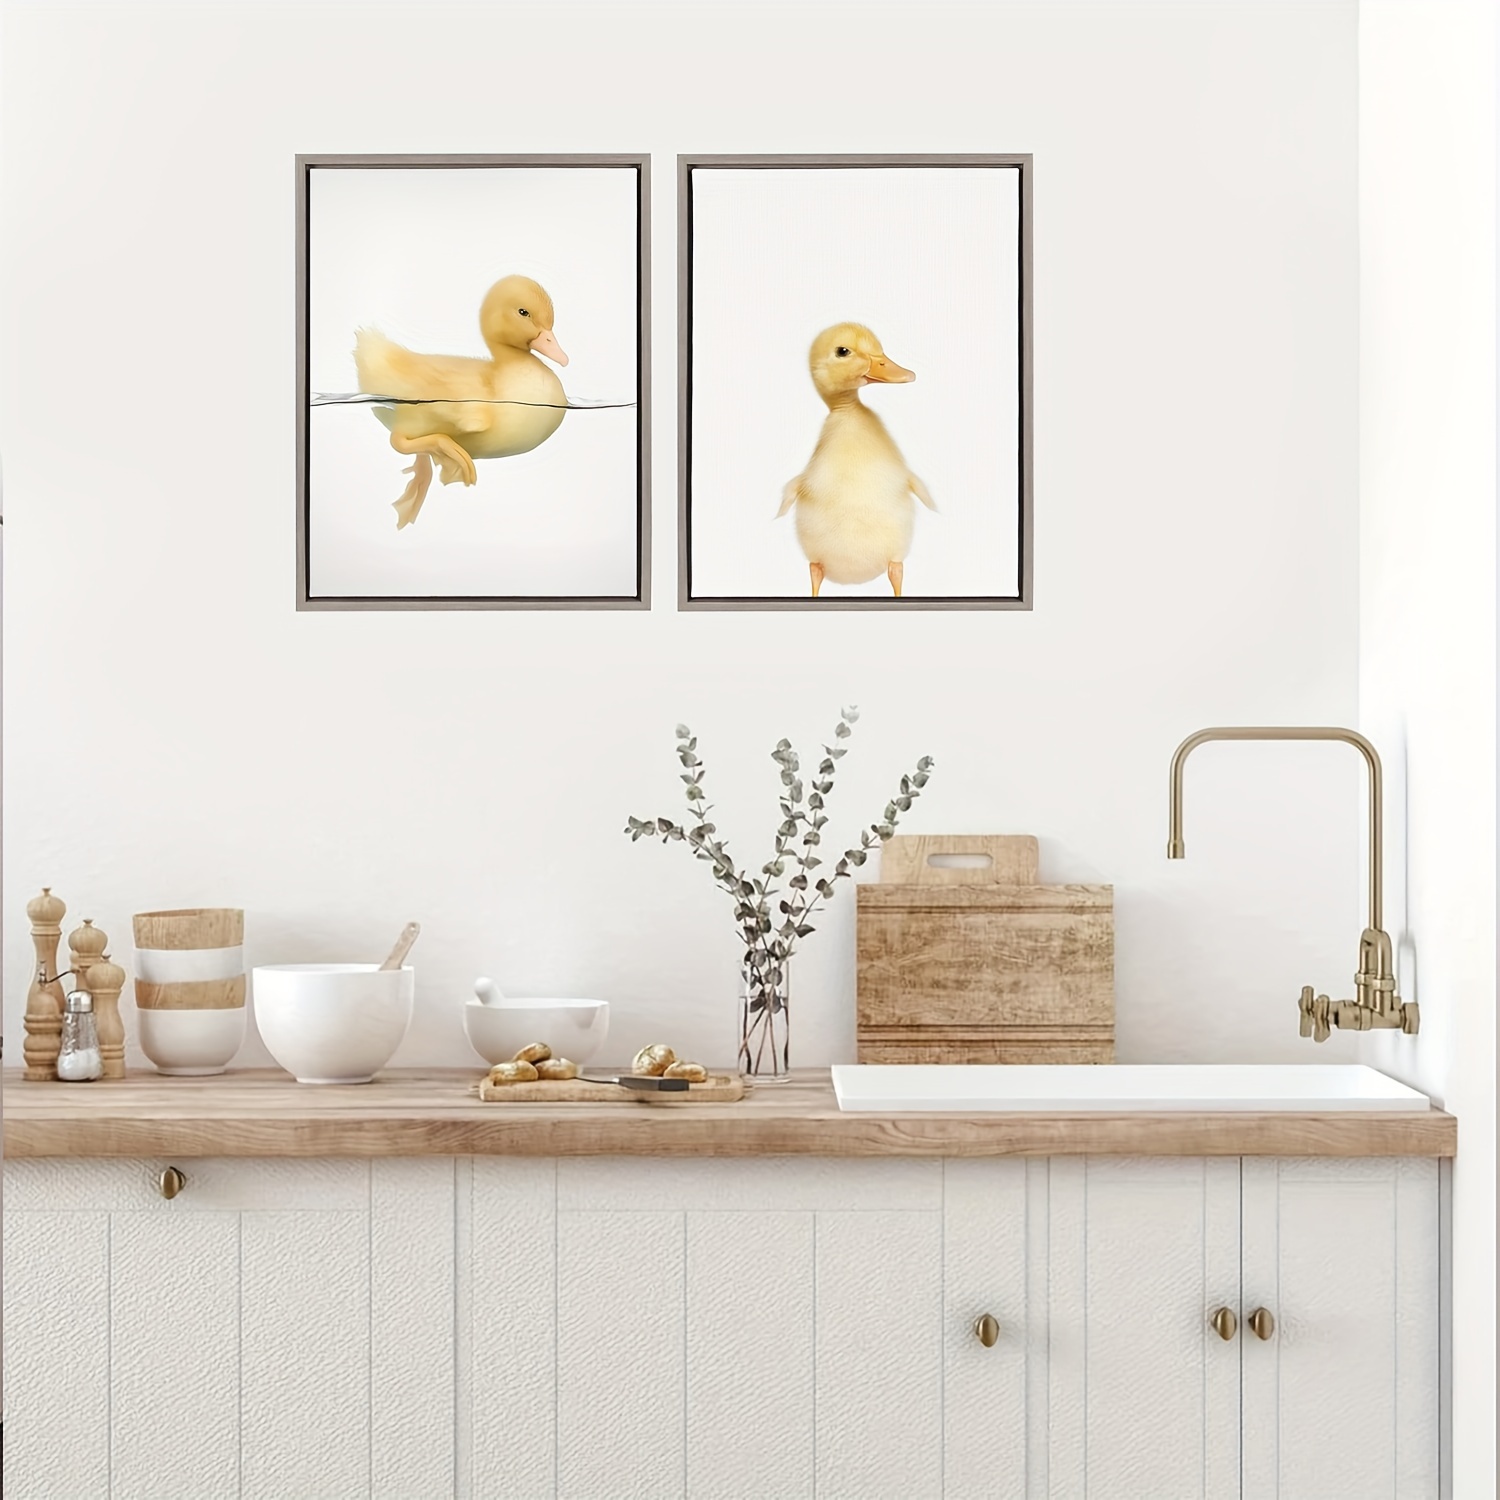 Elephant Baby & Duck Baby Animal Art Poster Print Picture 20x30Inch :  : Home